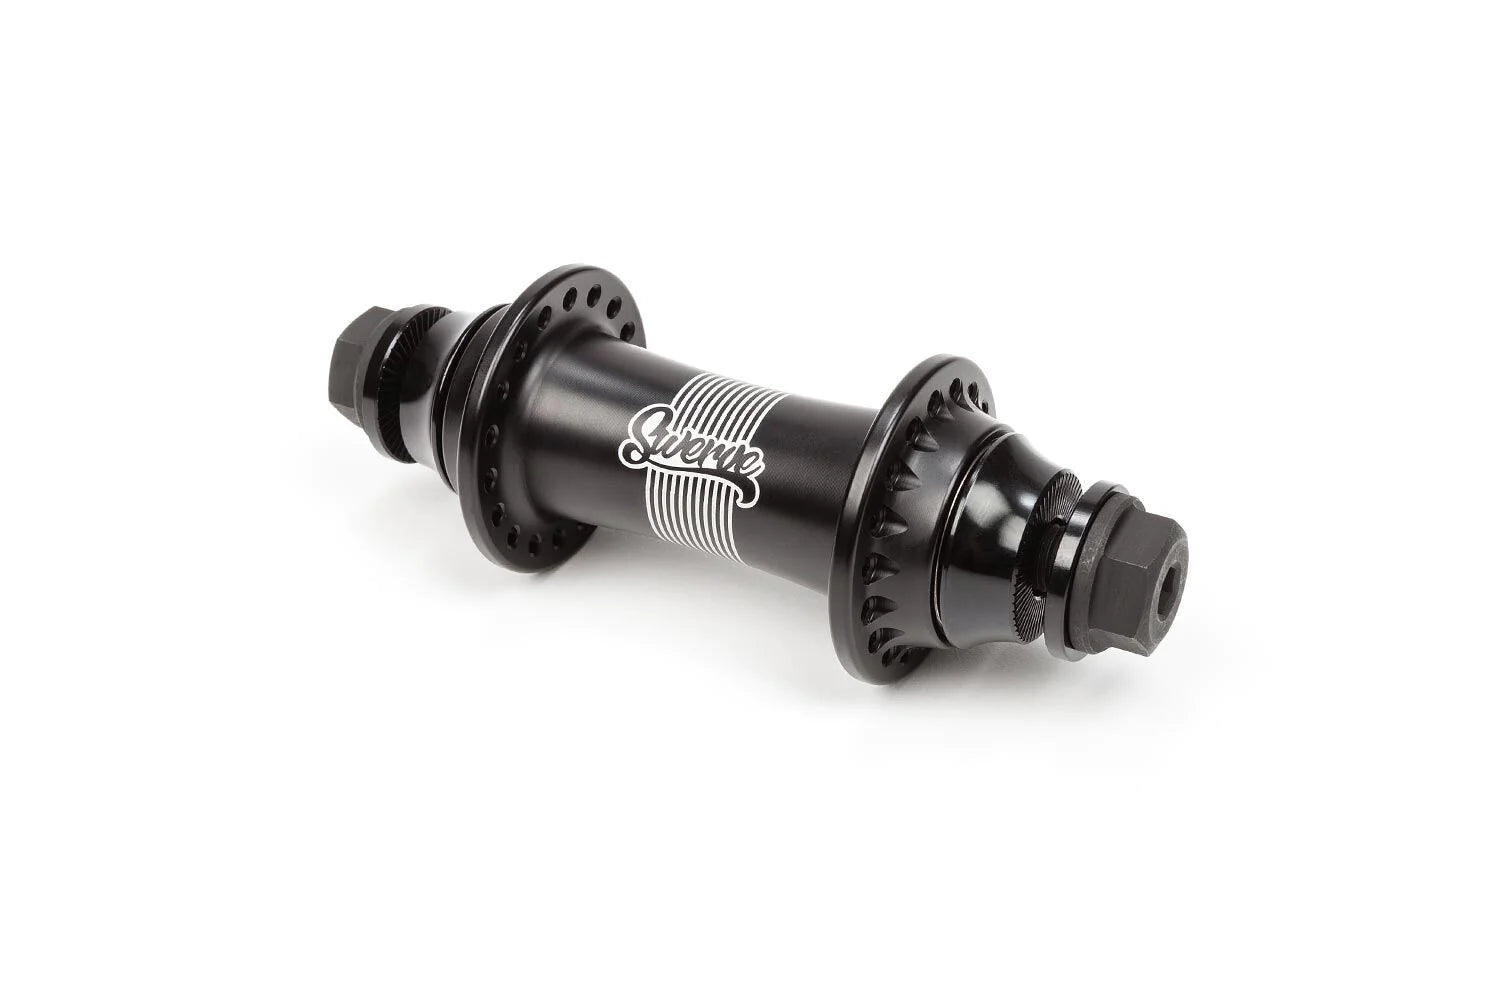 front view of the BSD Swerve front hub in black